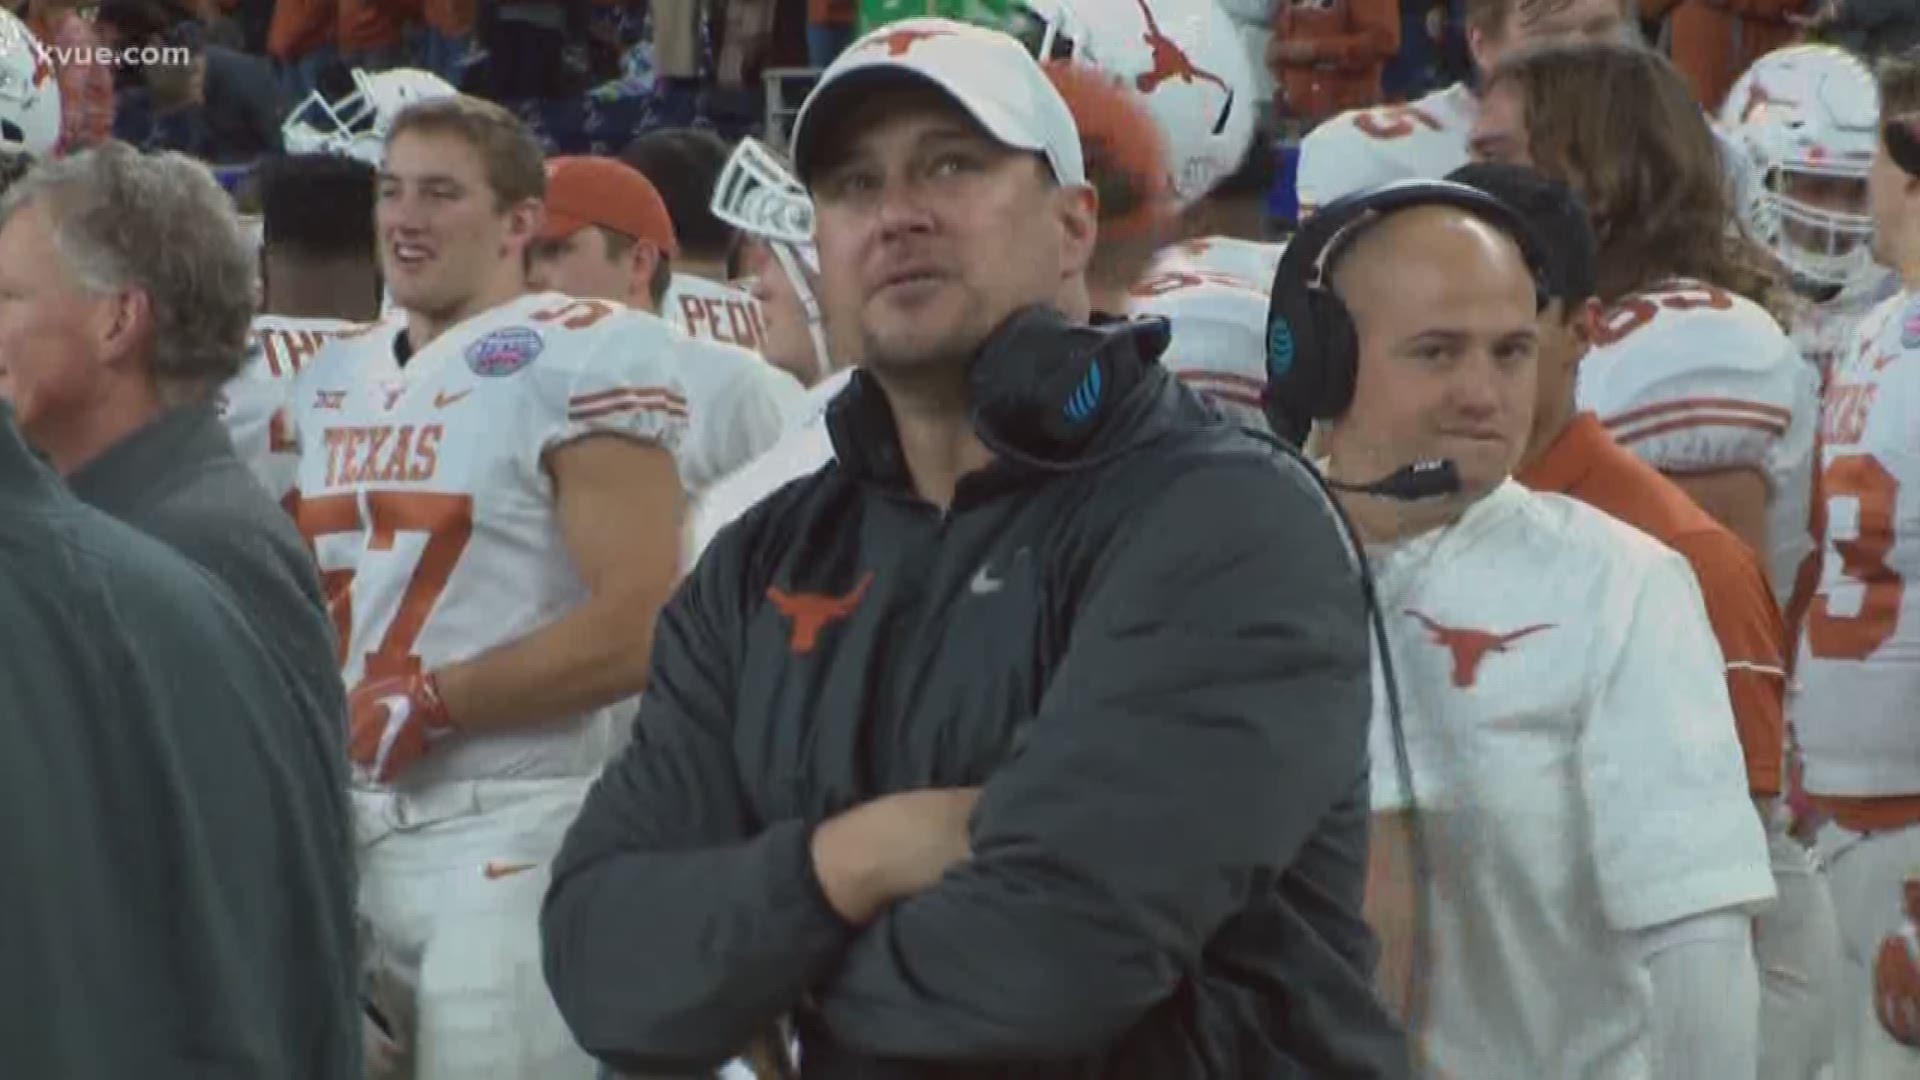 Texas head coach Tom Herman was accused of tipping off former ESPN reporter Brett McMurphy about the Ohio State scandal involving Zach Smith and his wife, Courtney Smith. Herman has responded saying the claims are "absolutely untrue."